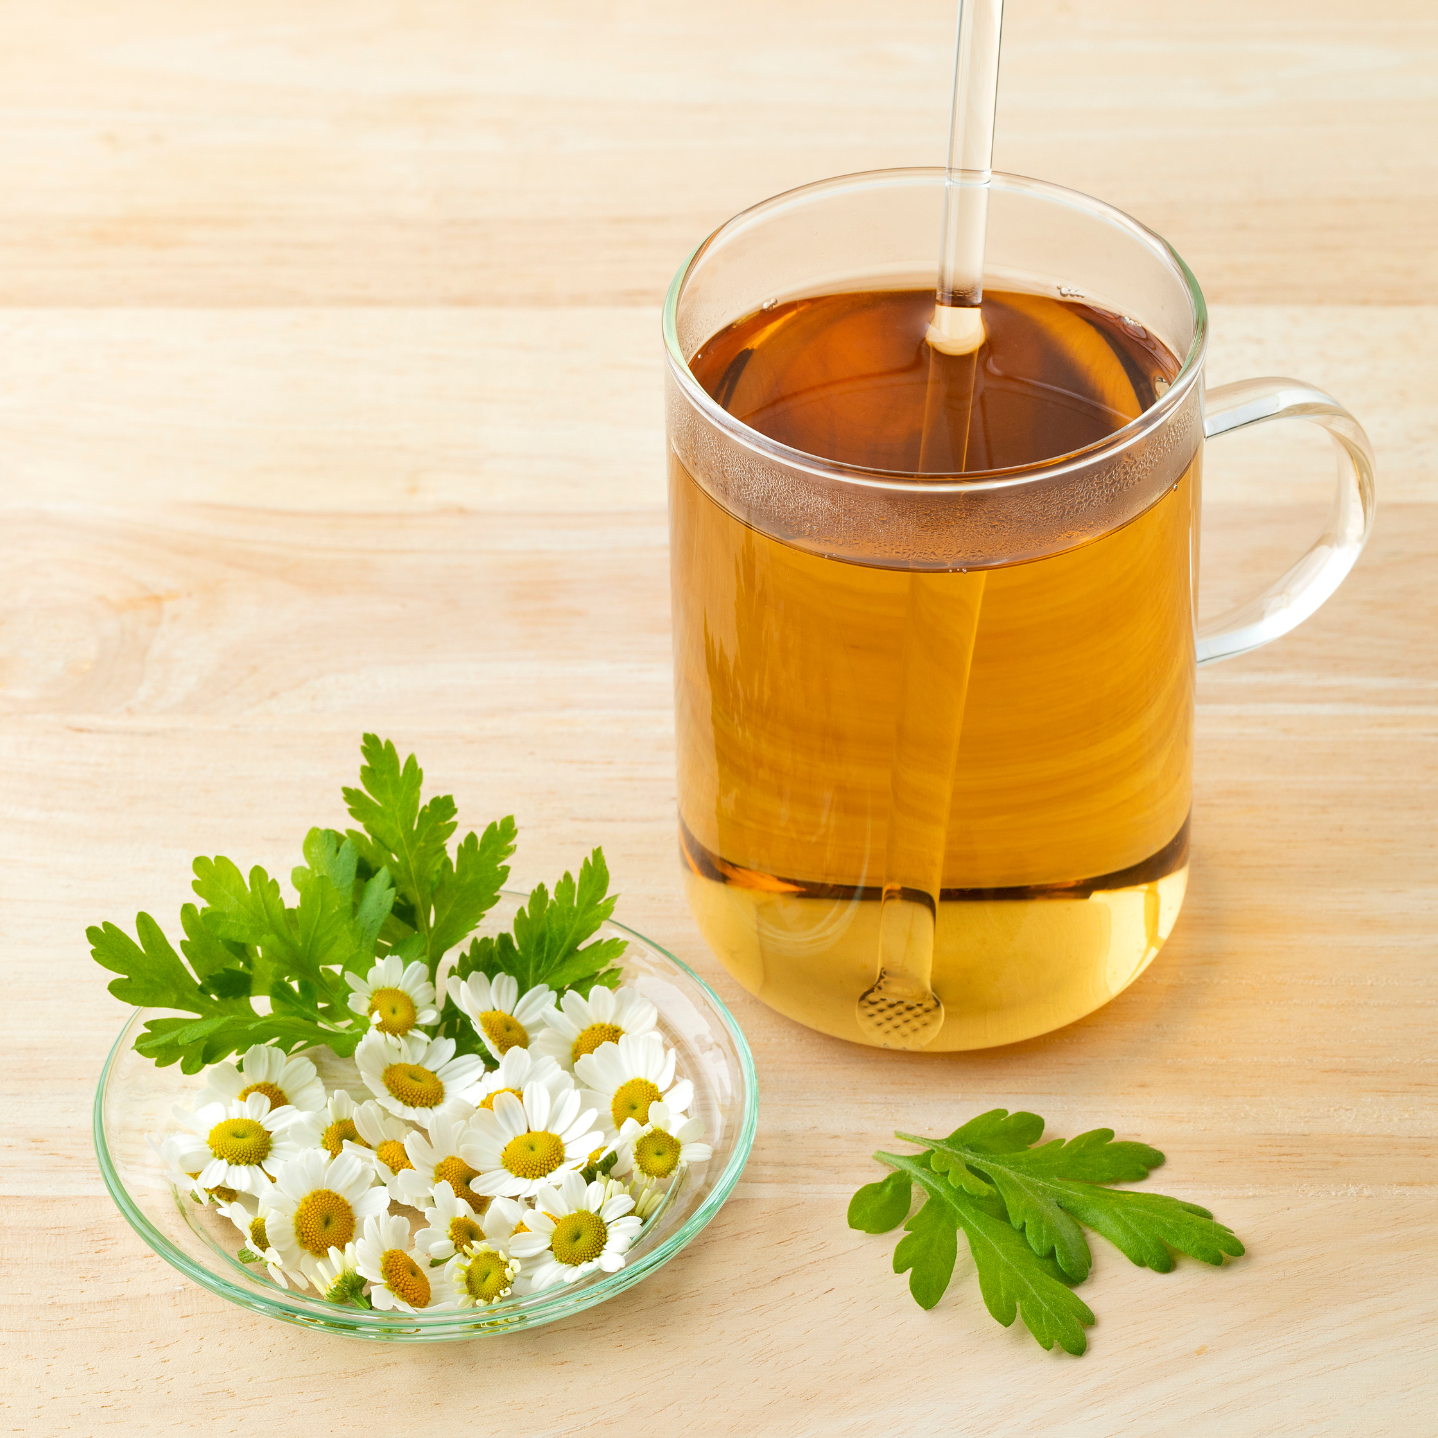 Feverfew Herb, Dried Herbs, Food Grade Herbs, Herbs and Spices, Loose Leaf Herbs